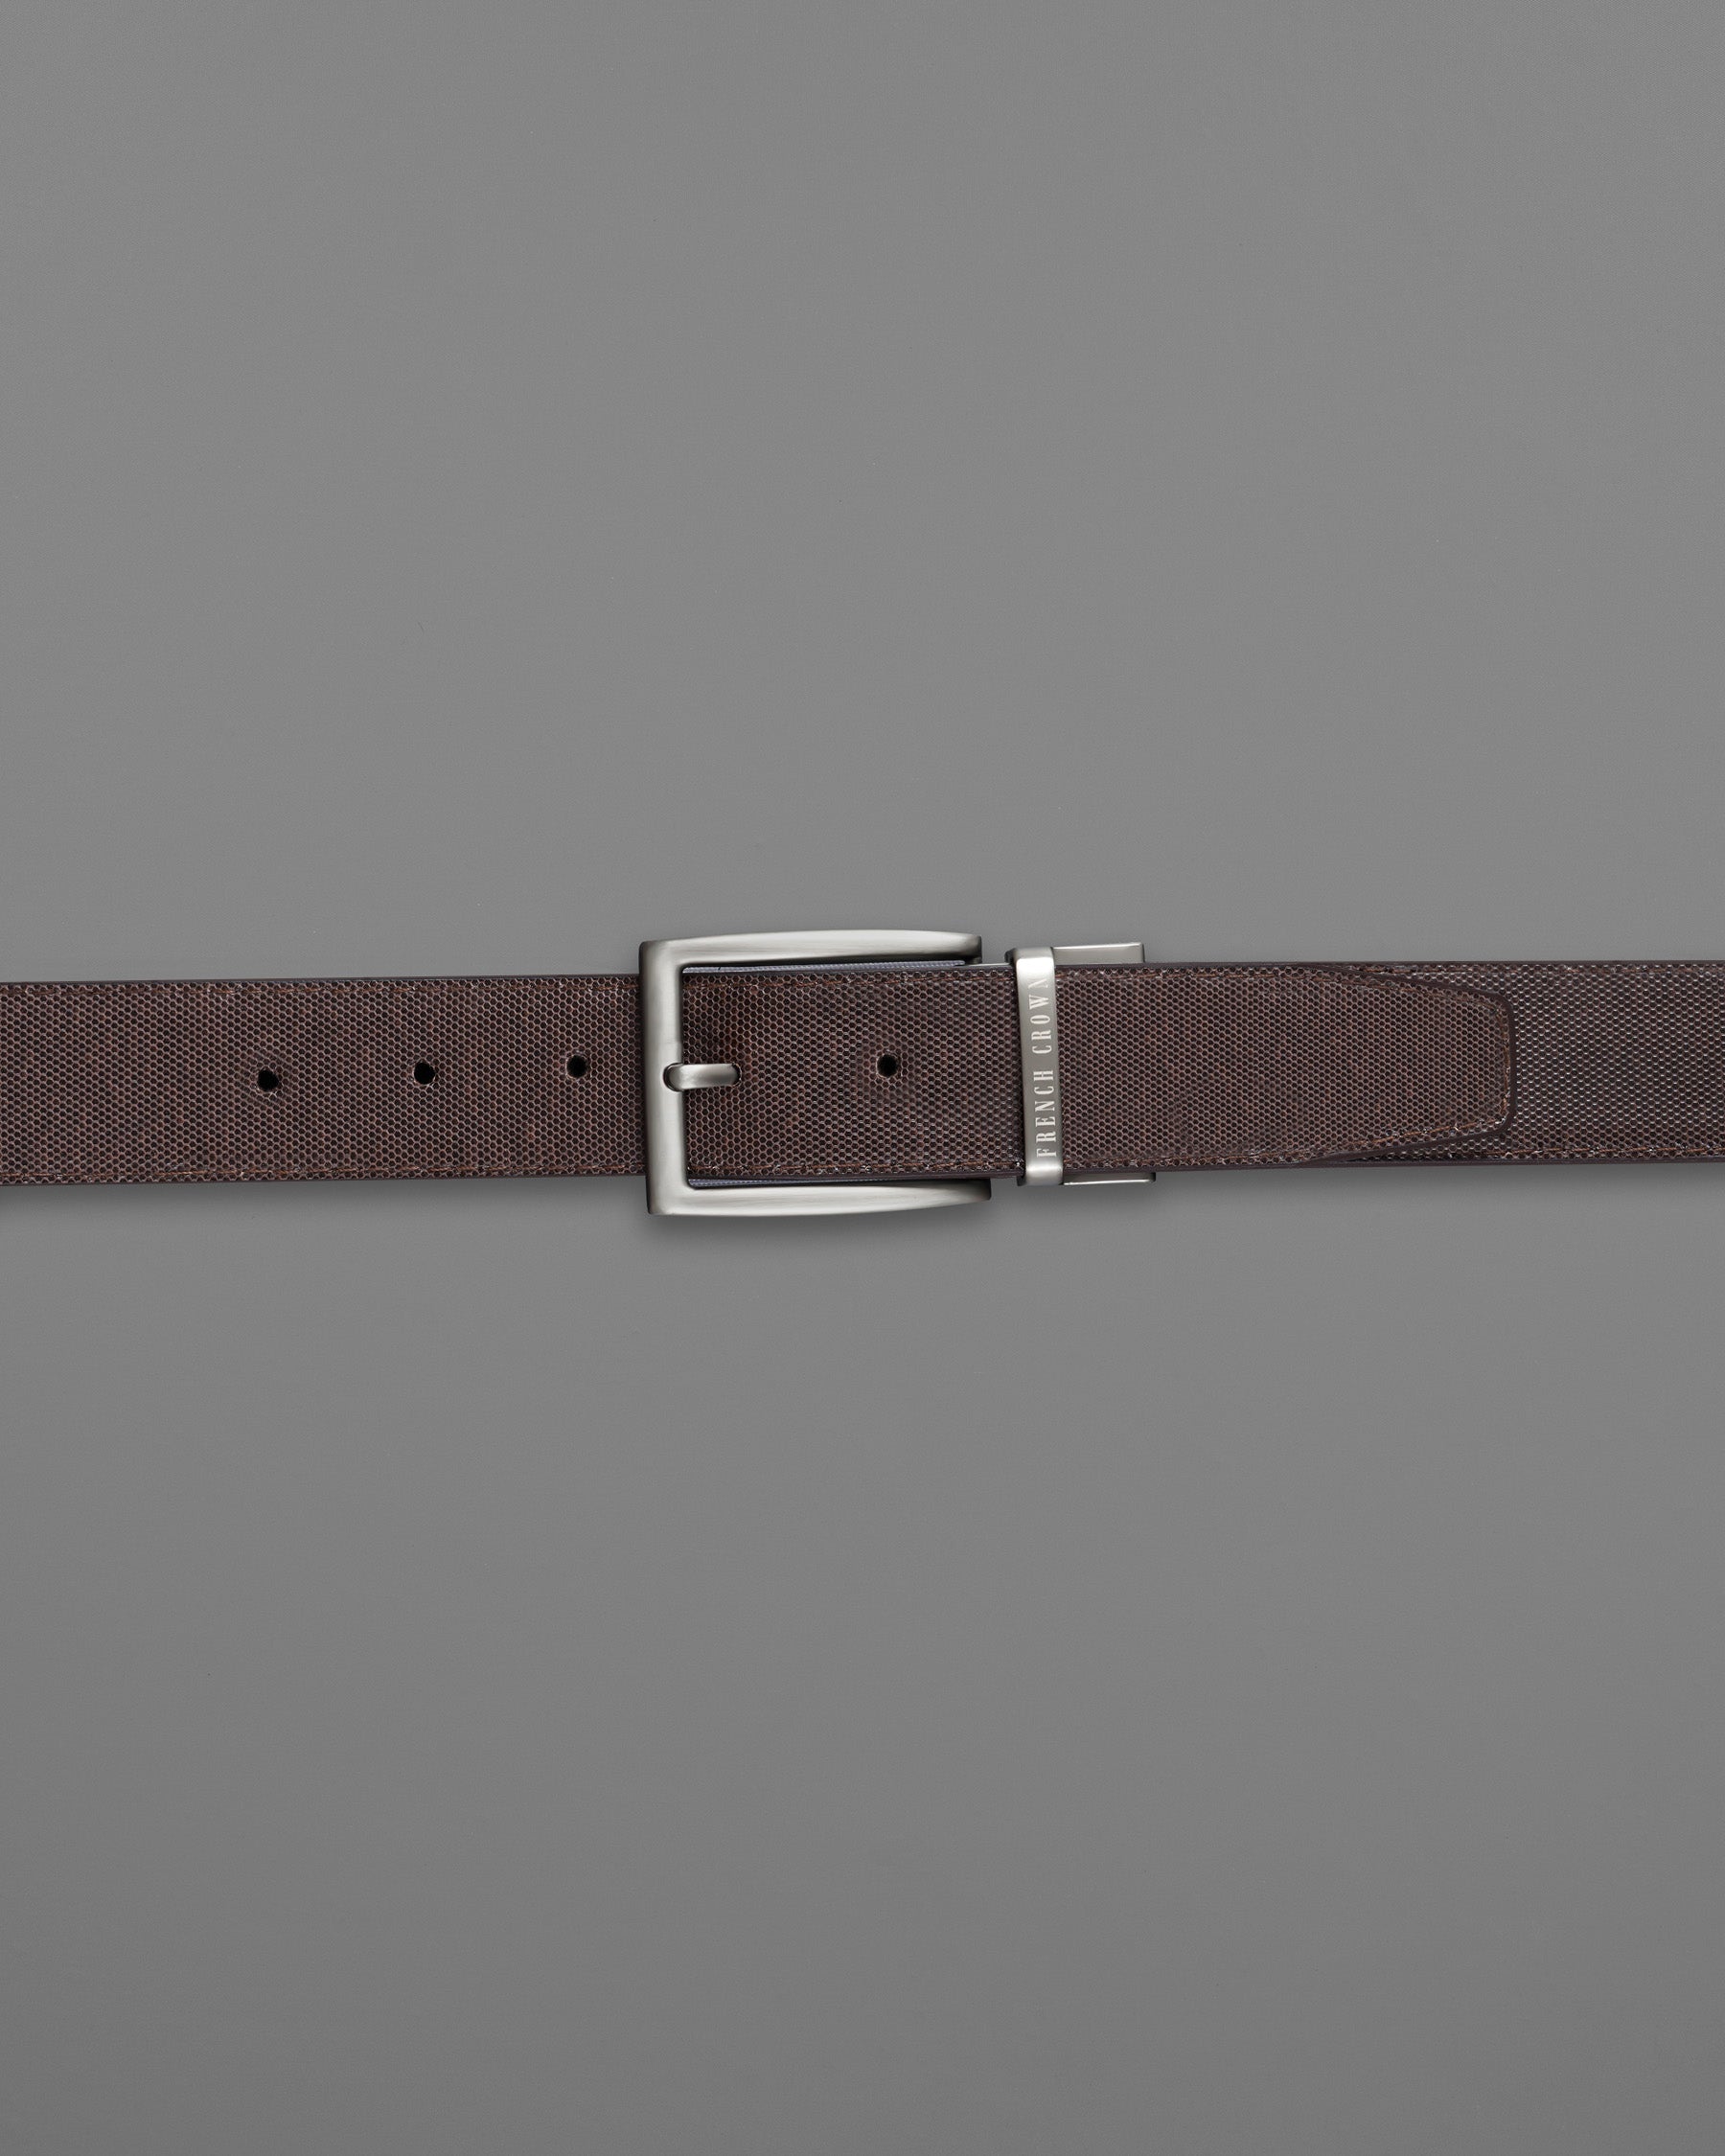 Silver Buckle with Jade Black and Brown Leather Free Handcrafted Reversible Belt BT053-28, BT053-30, BT053-32, BT053-34, BT053-36, BT053-38